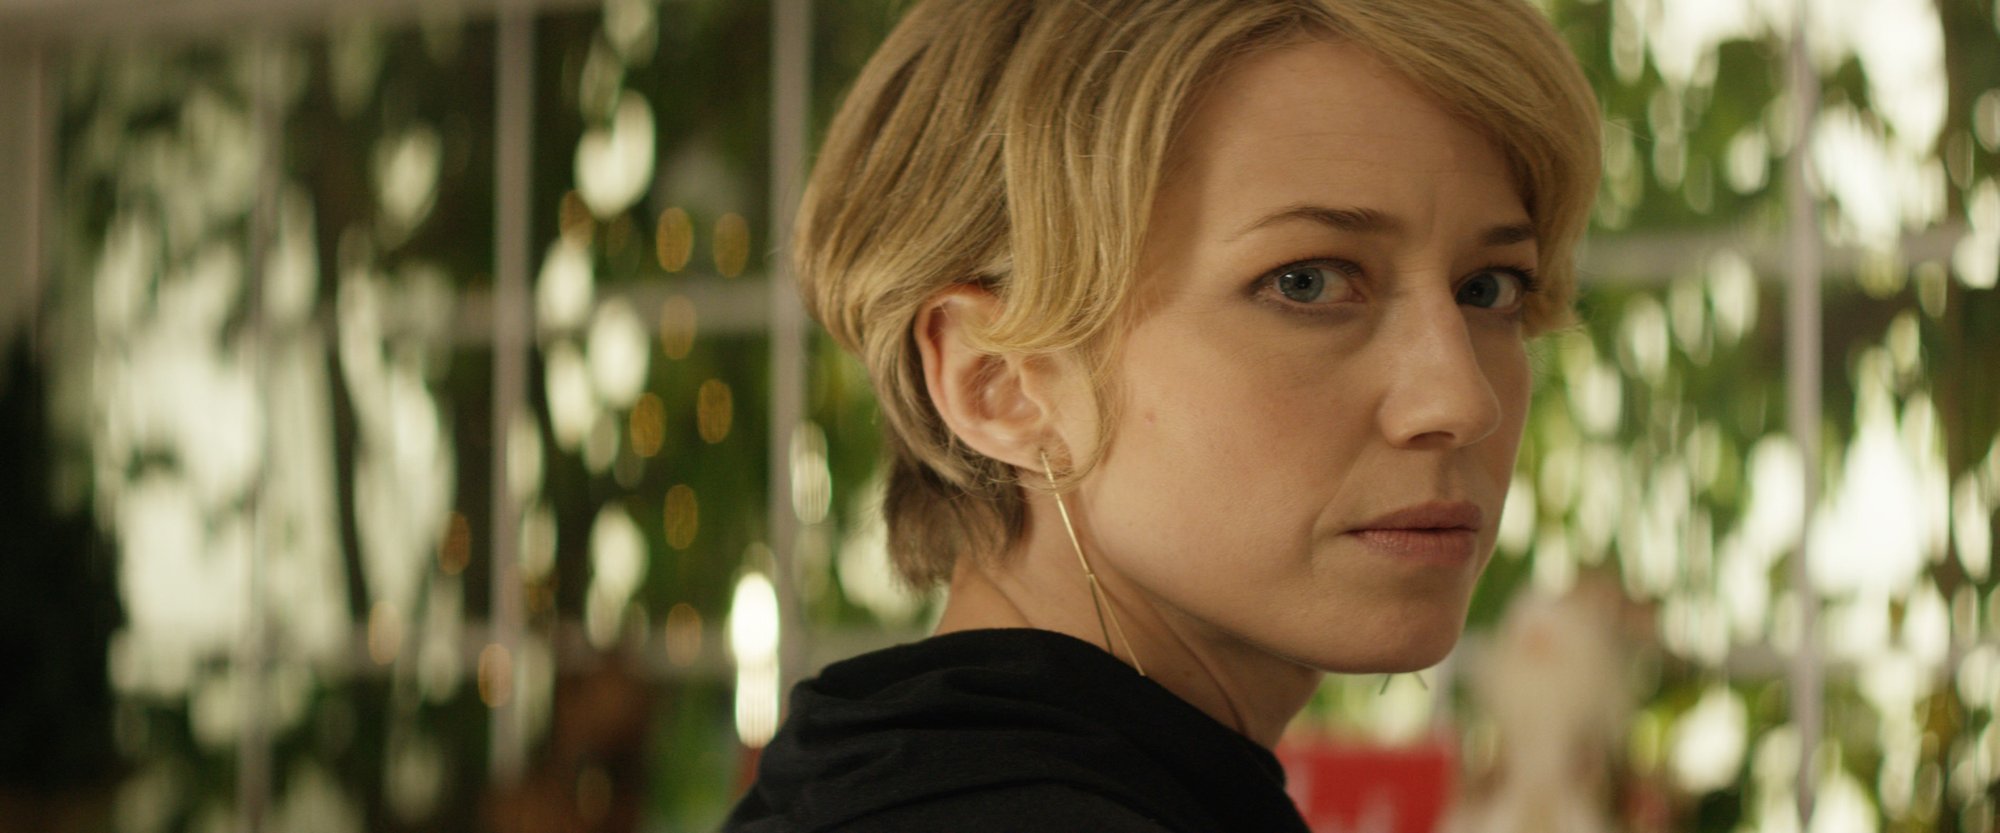 Carrie Coon stars as Virginia in Shout! Studios' Izzy Gets the F*ck Across Town (2018)